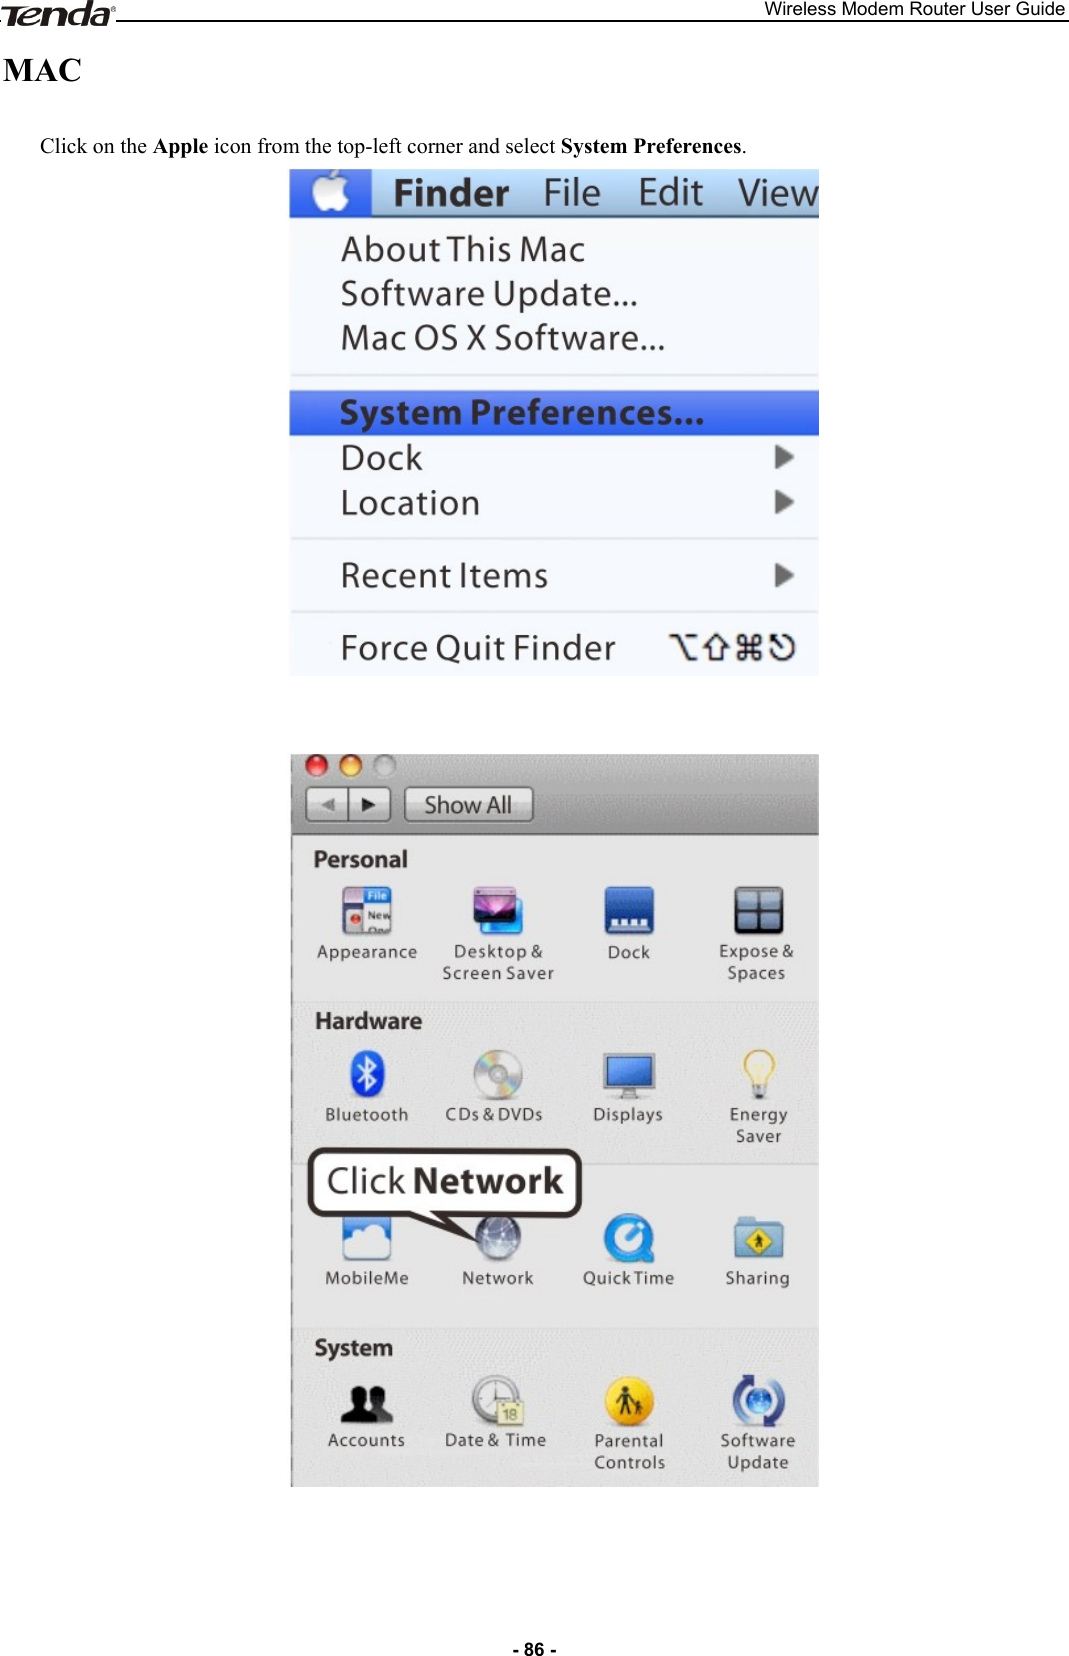 Wireless Modem Router User Guide - 86 - MAC Click on the Apple icon from the top-left corner and select System Preferences.    